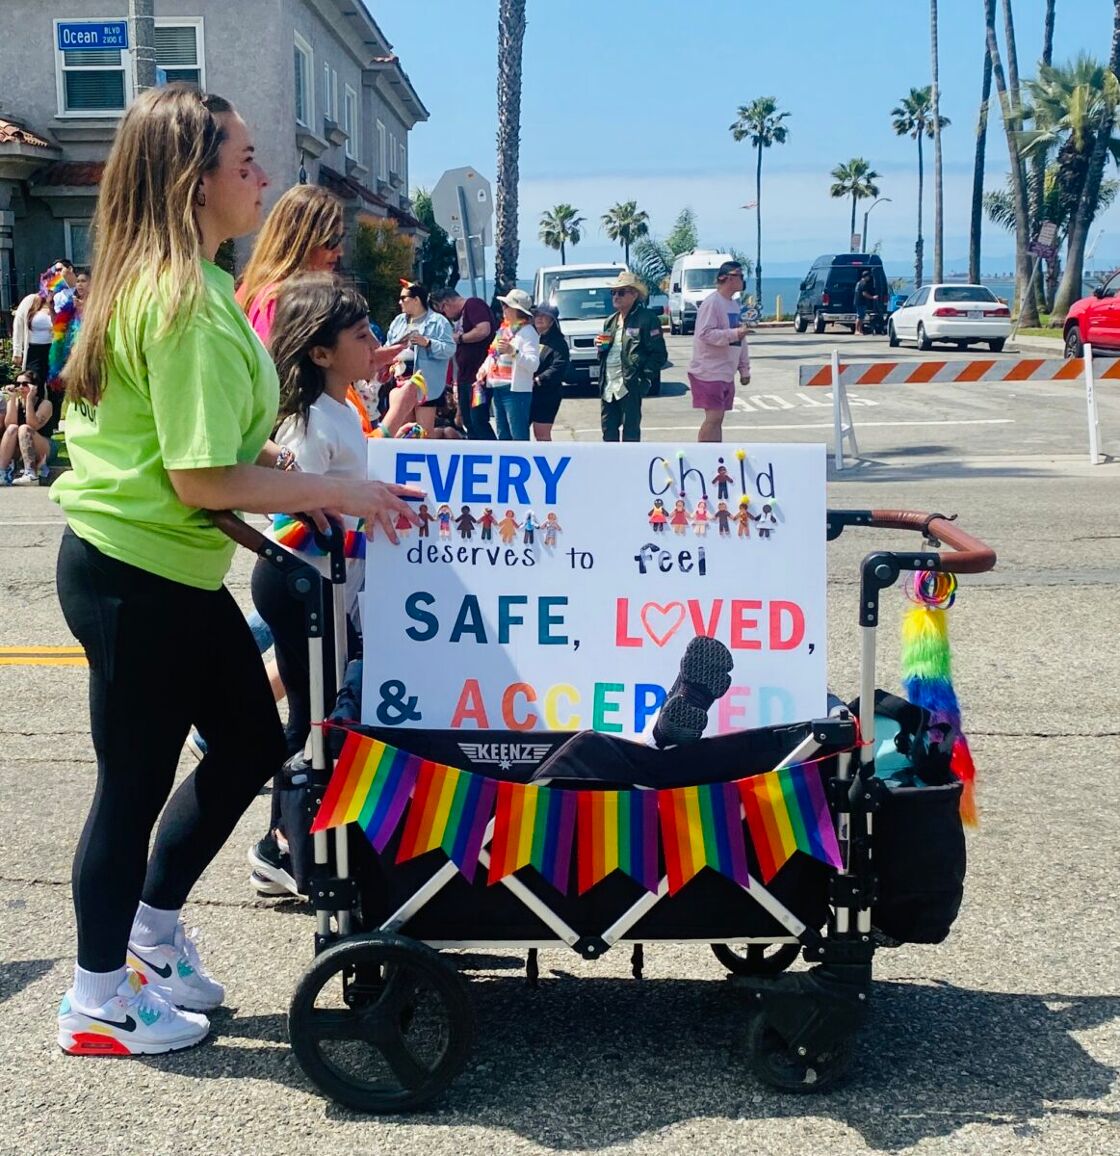 A proud mom with wagon at Long Beach Pride